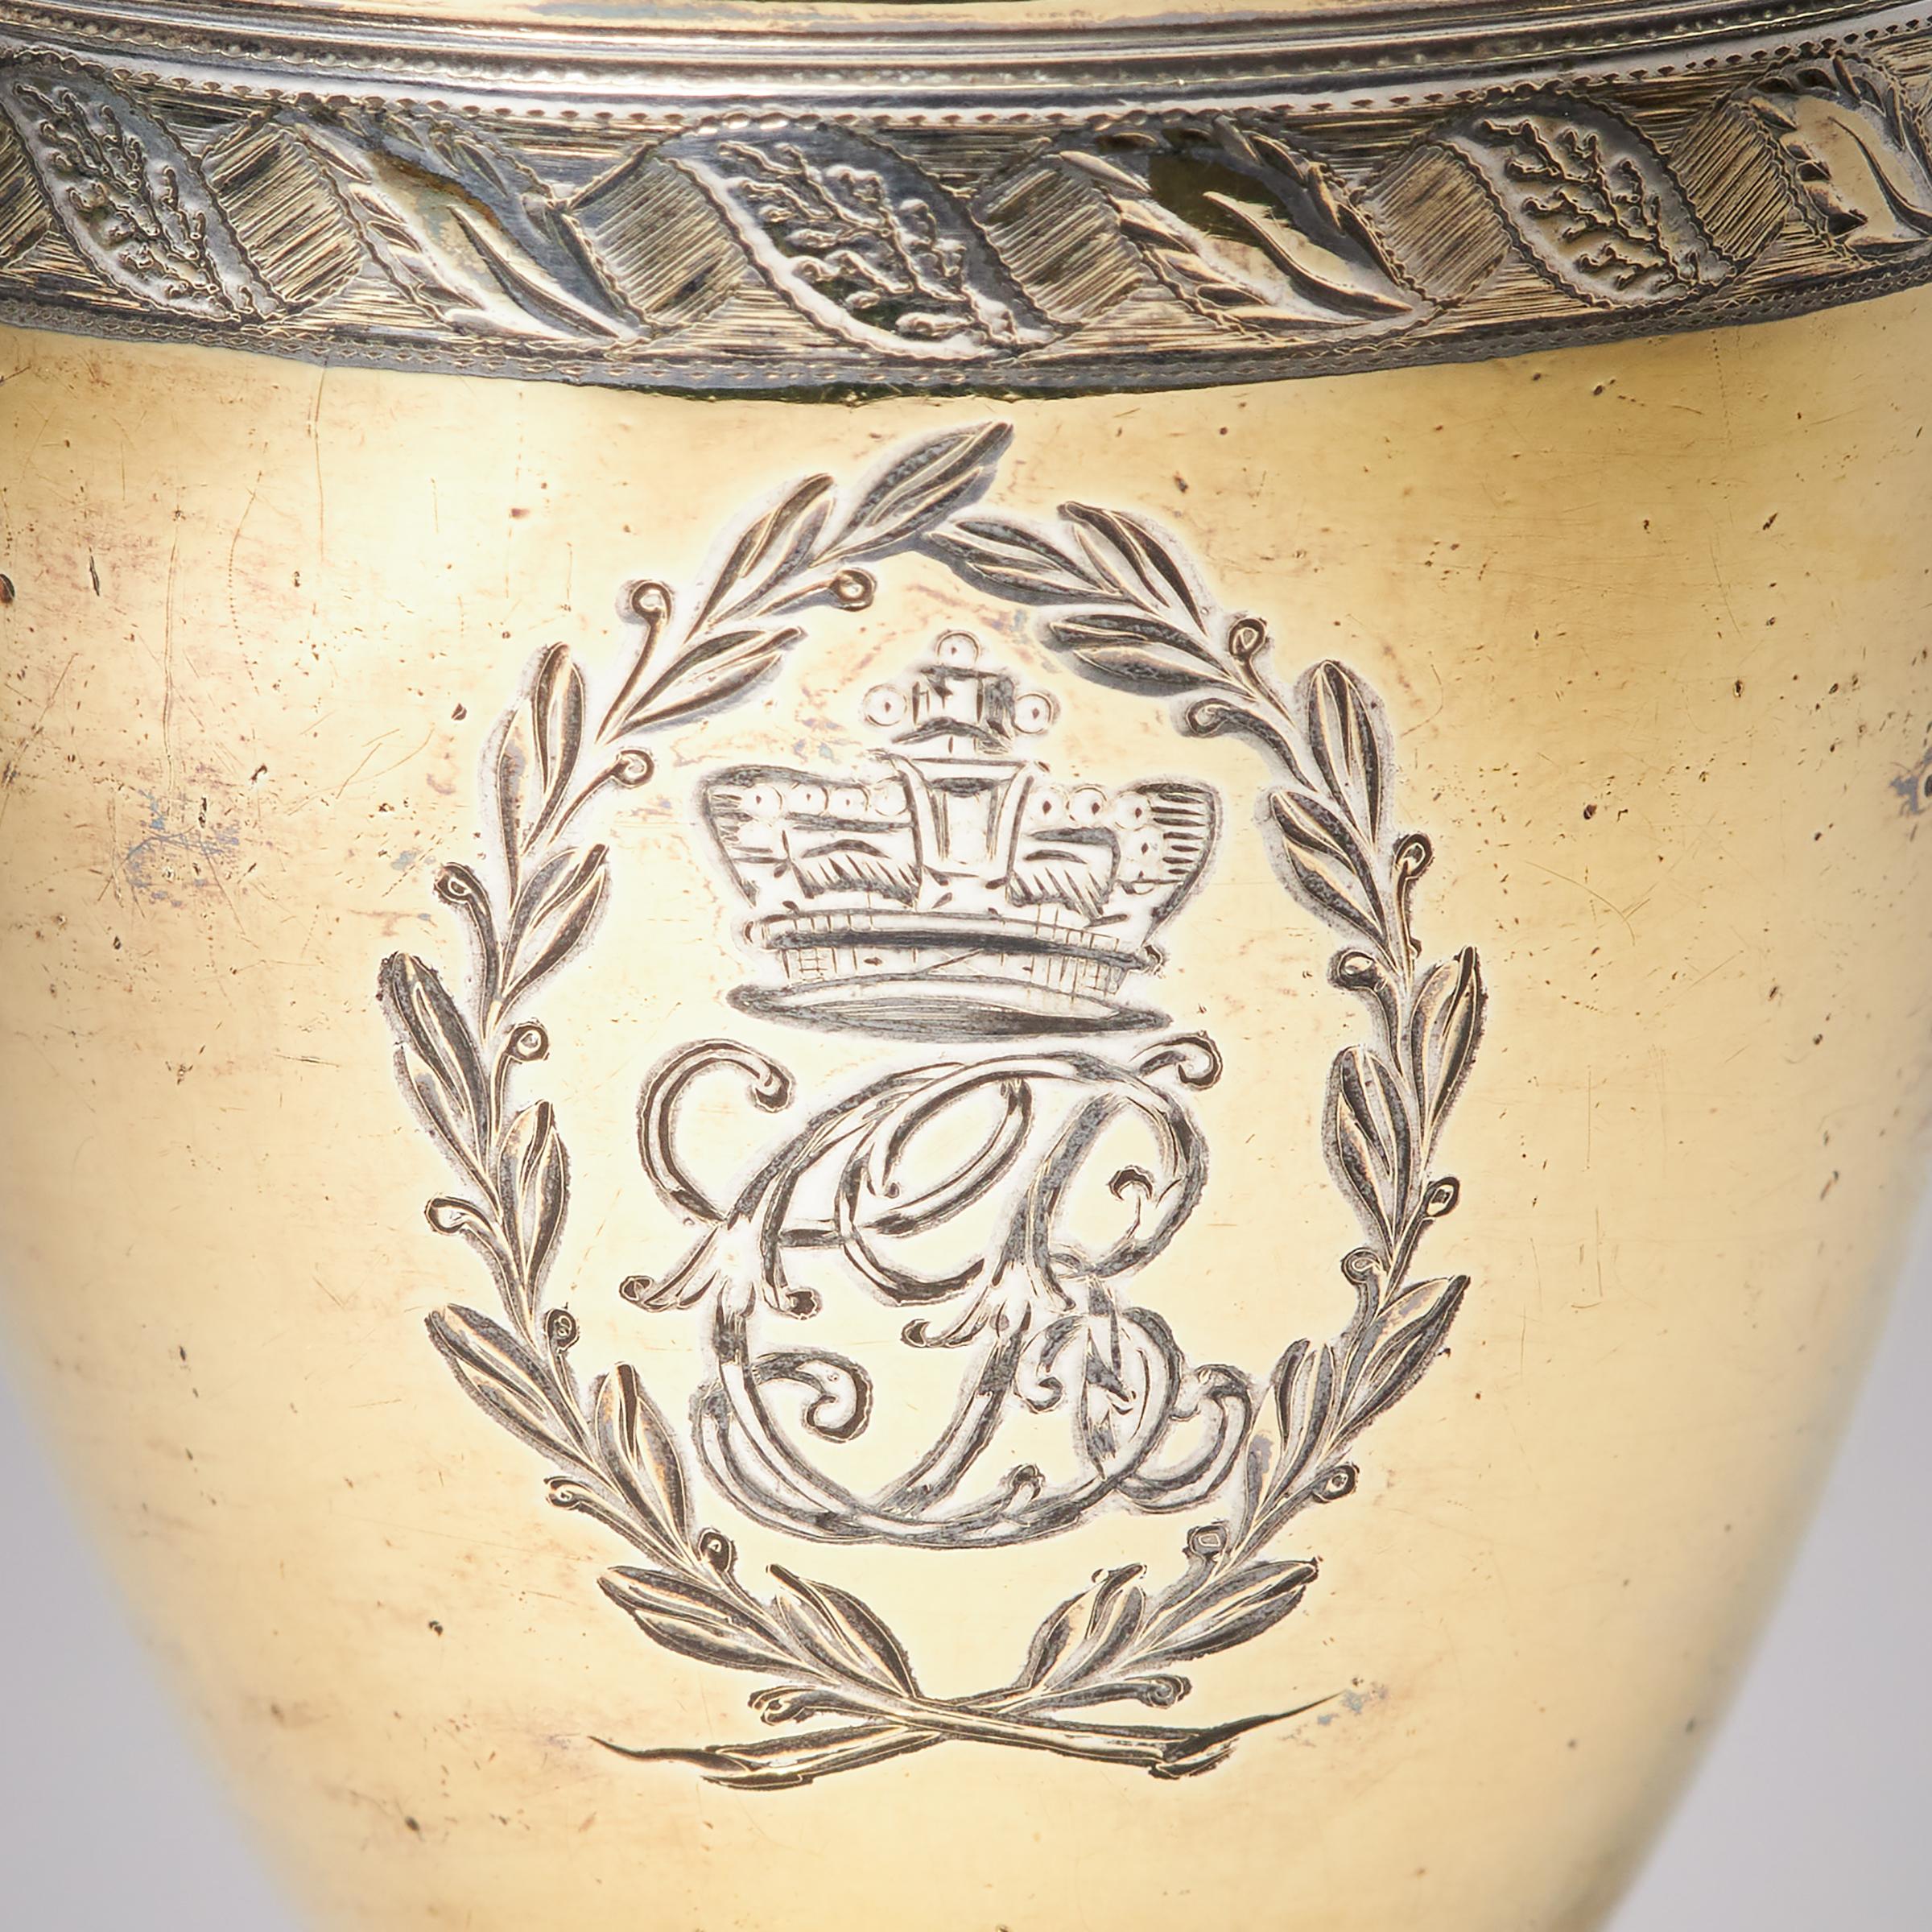 George III Silver-Gilt Pepper Pot with the Royal Cypher of Queen Charlotte 1798-5